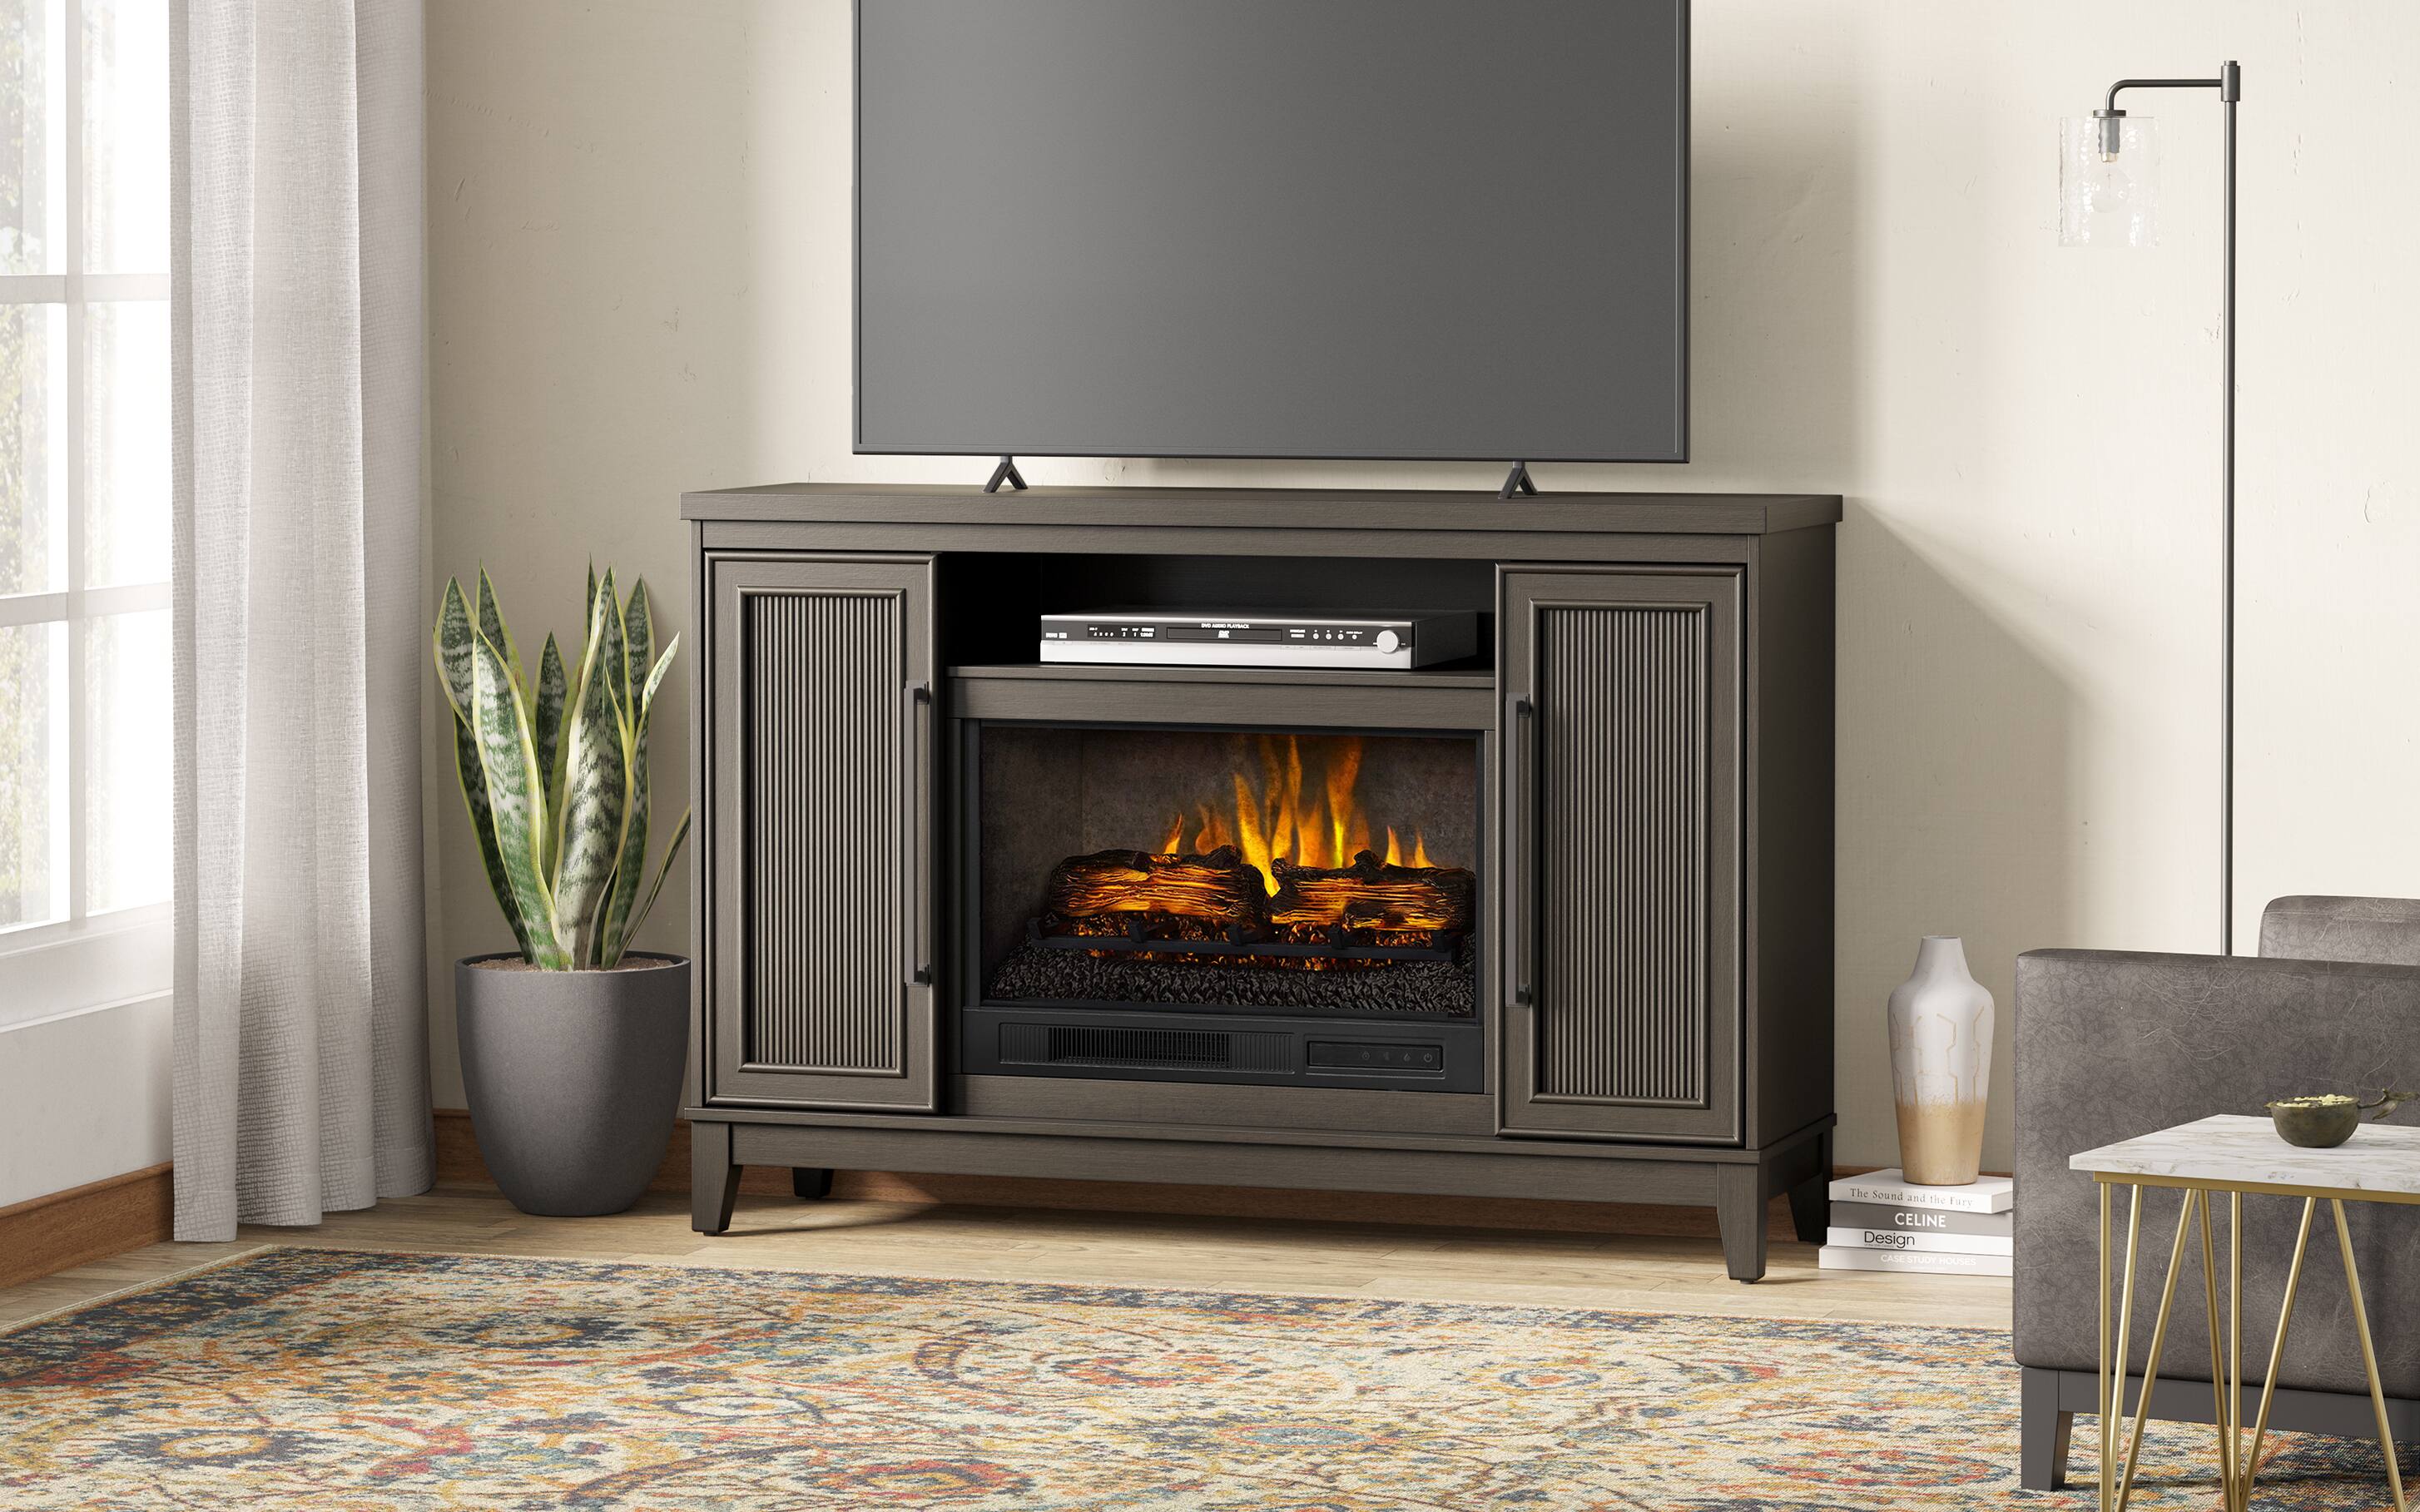 SAVINGS ON ELECTRIC FIREPLACES